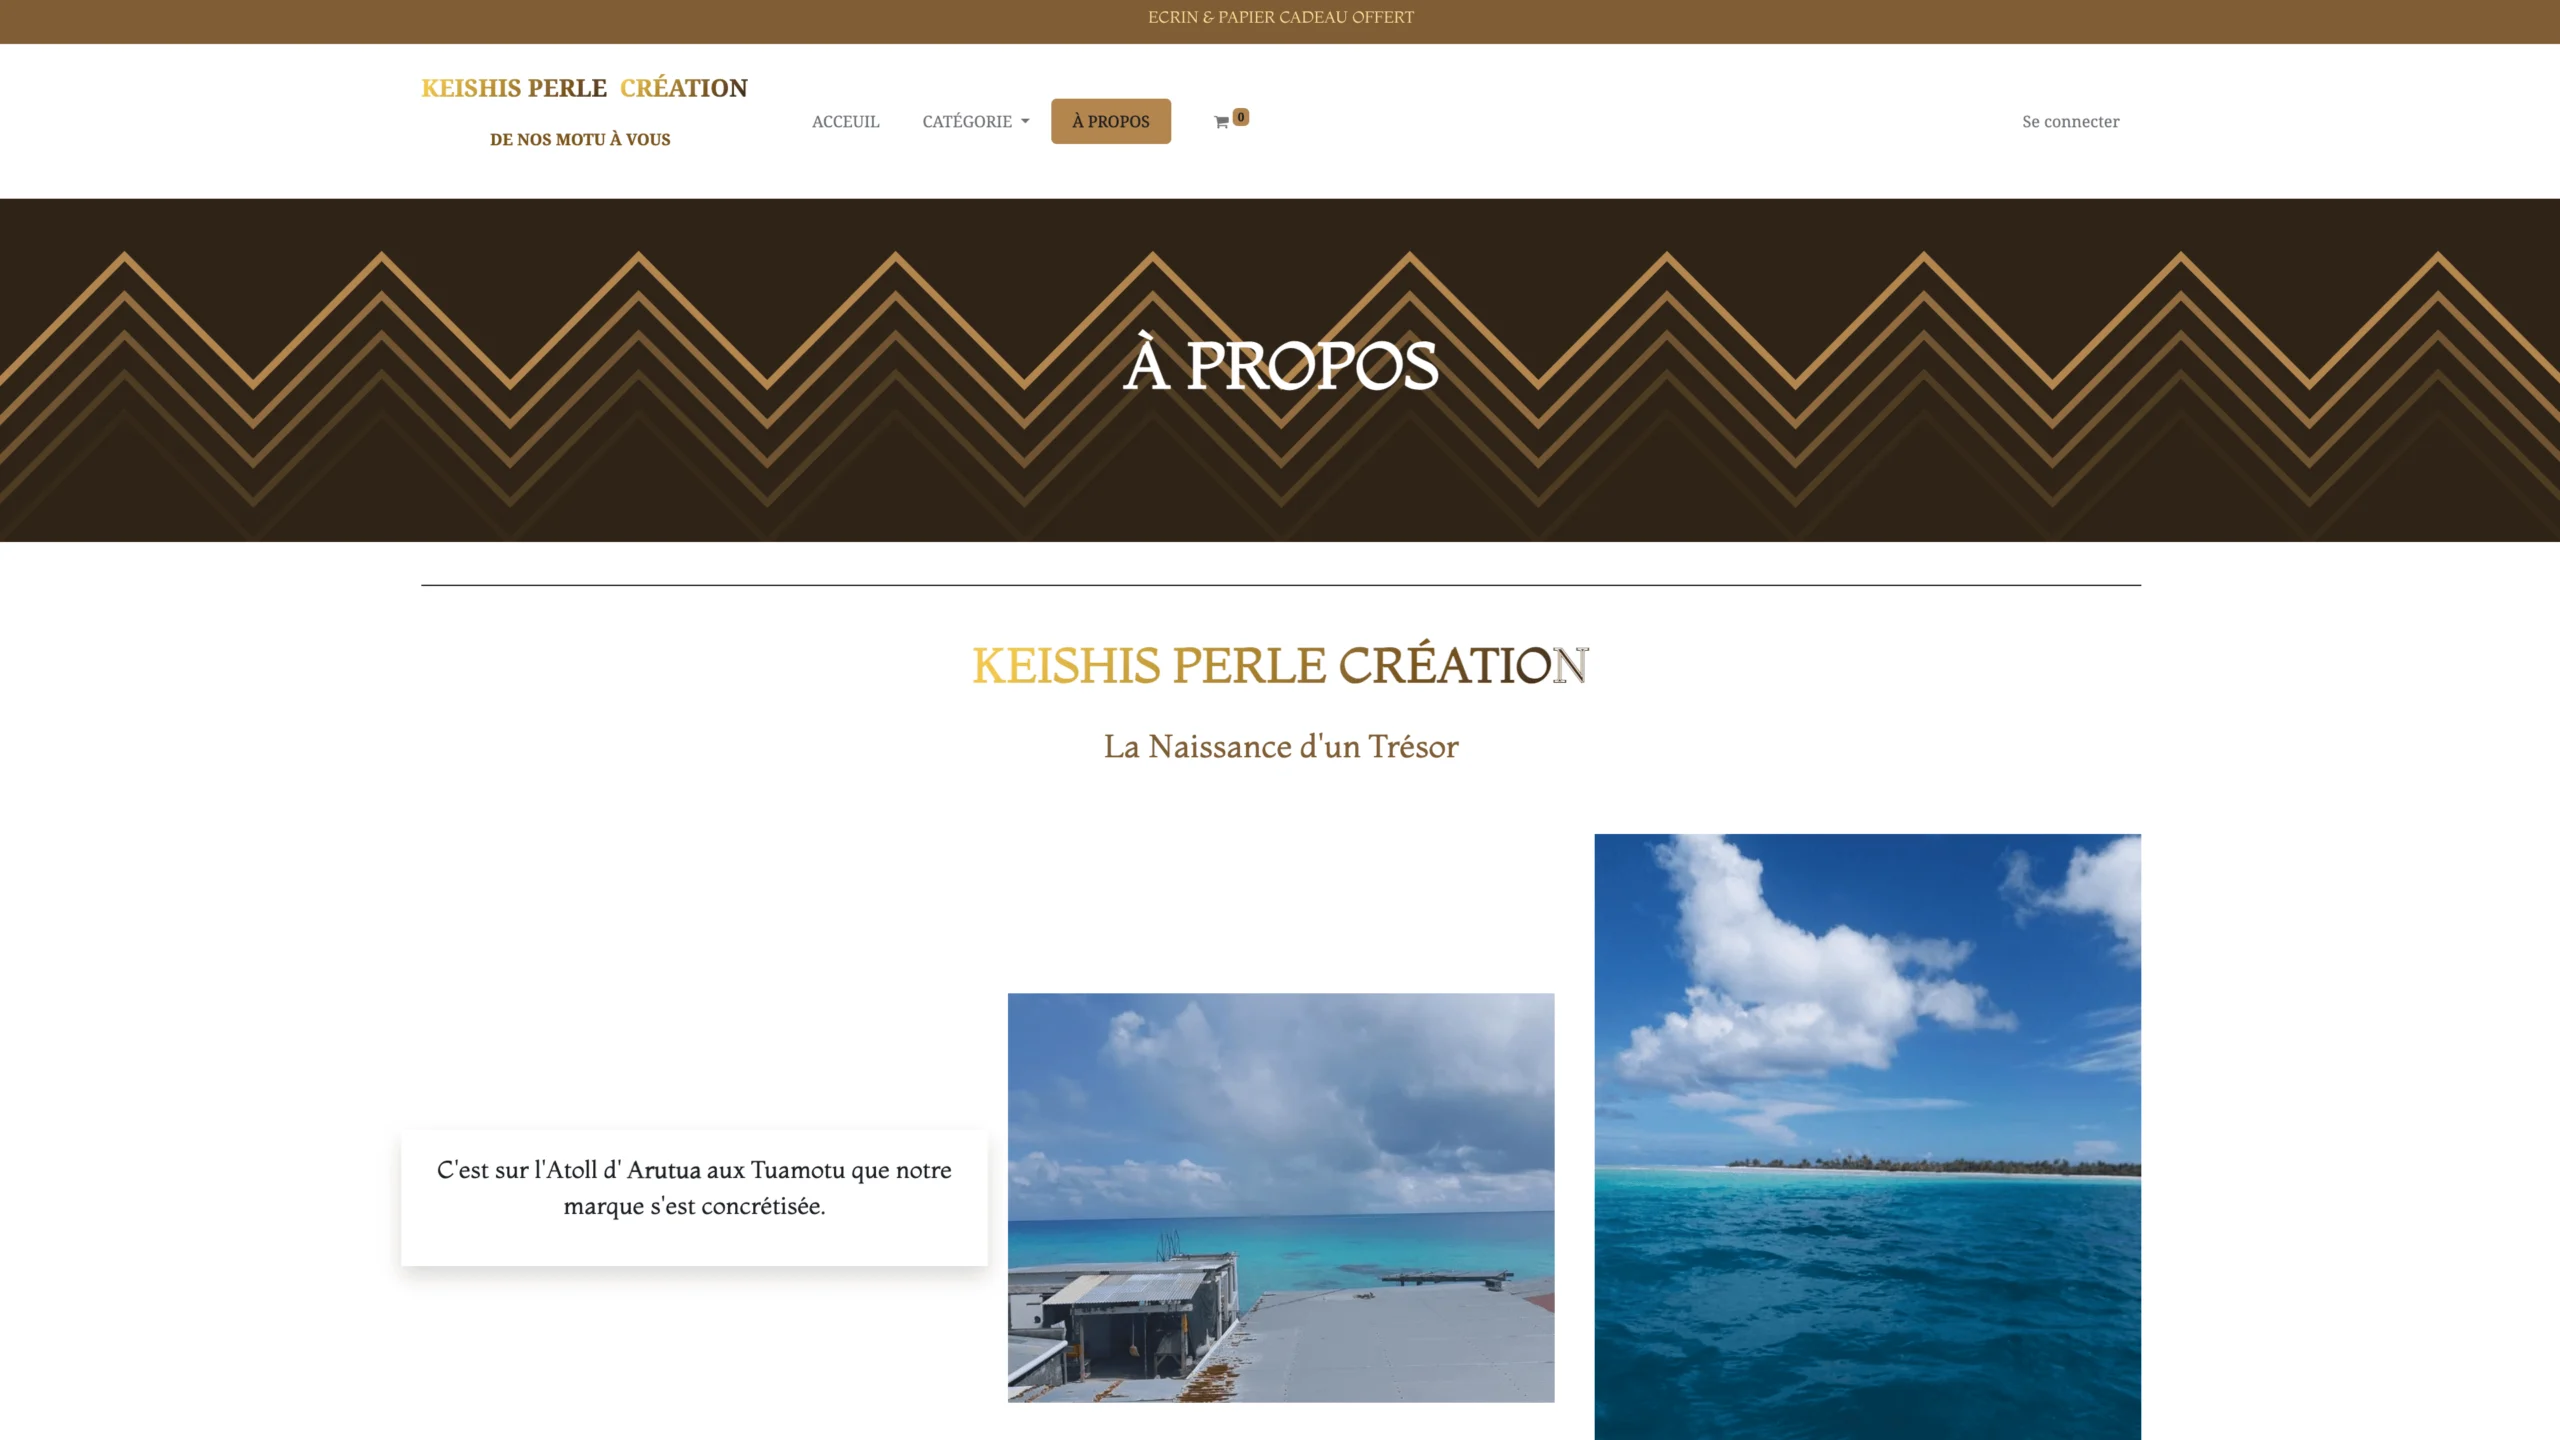 keishis_perle_creation_page_4